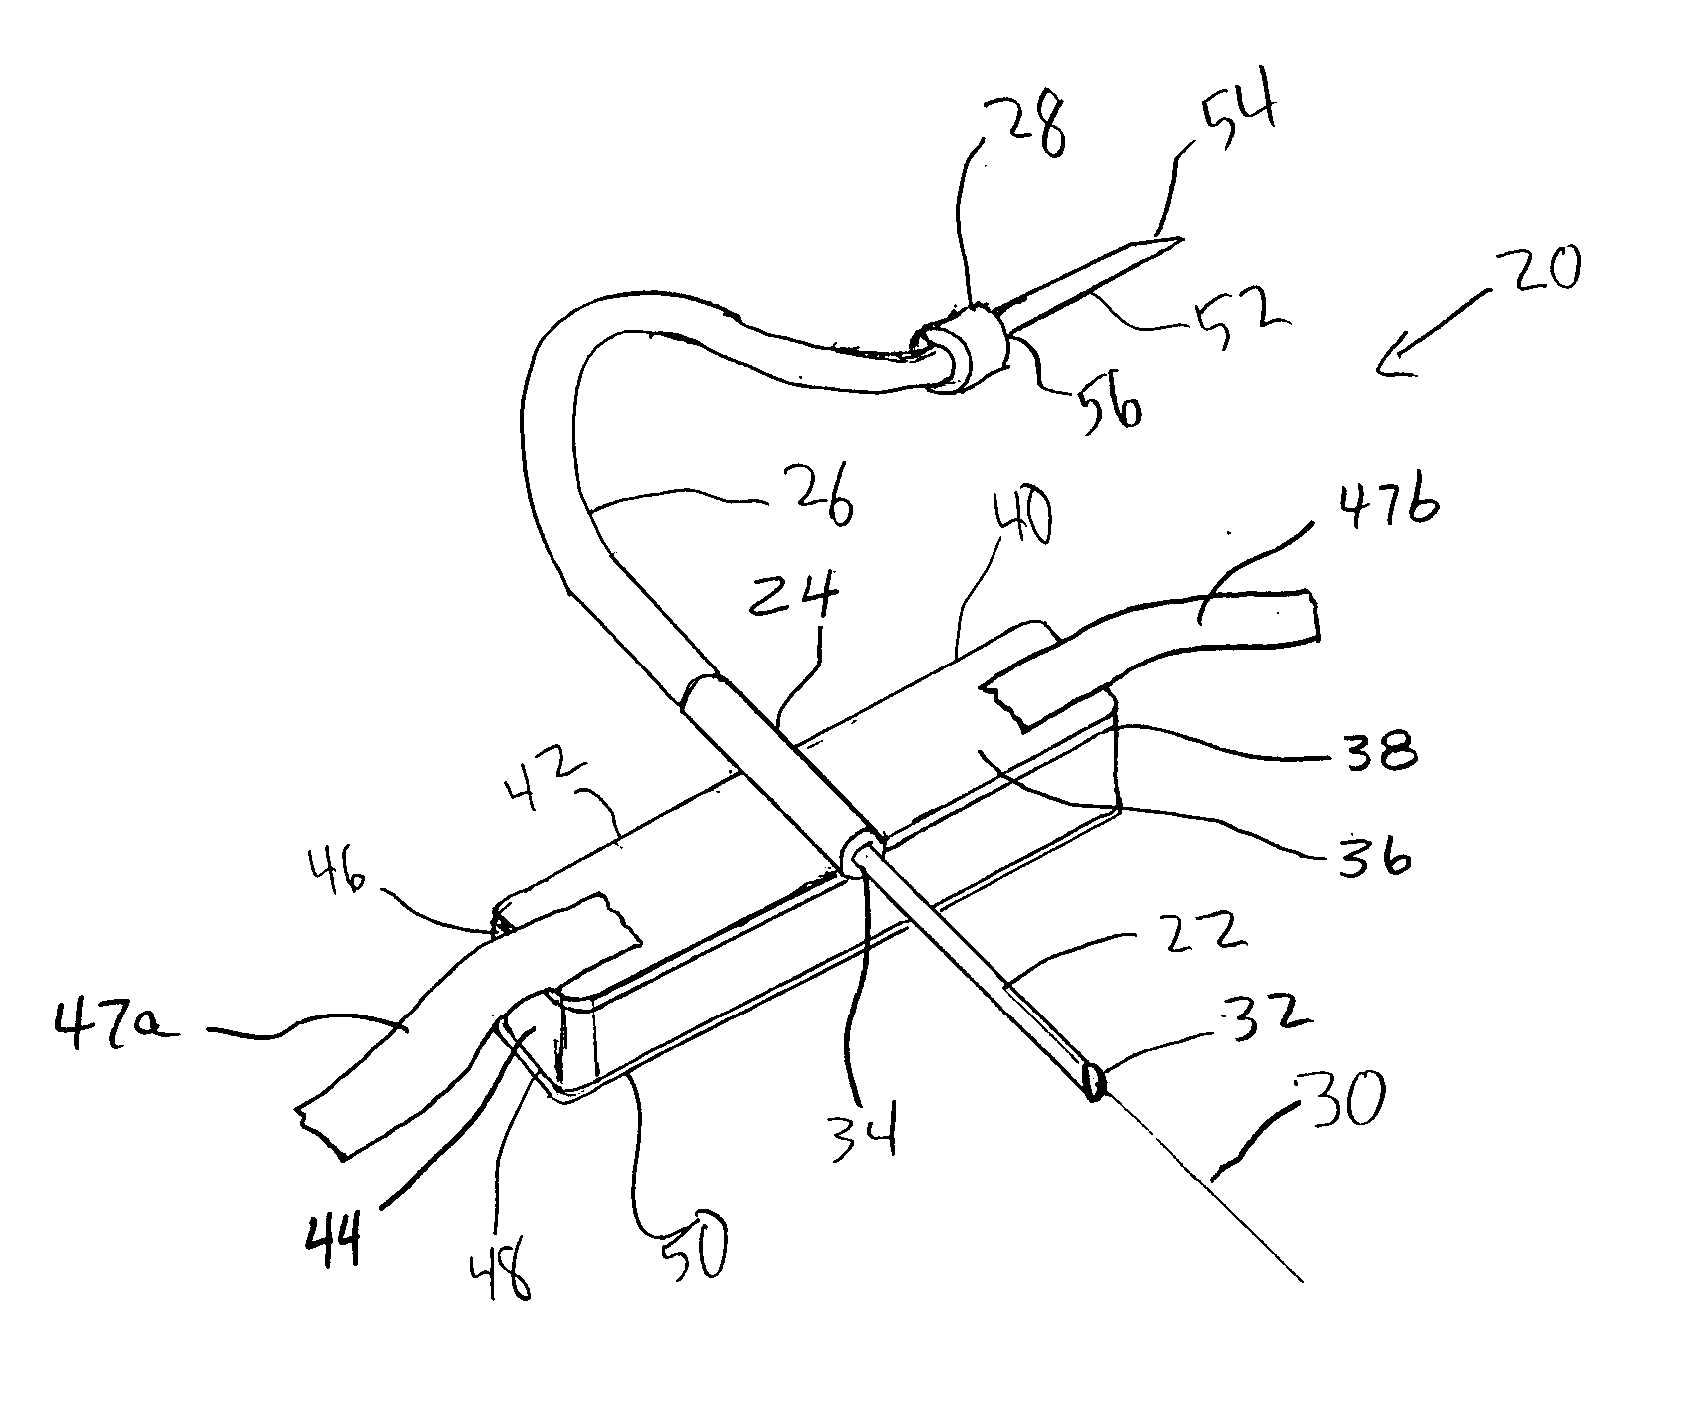 Intravenous needle assembly and method of use